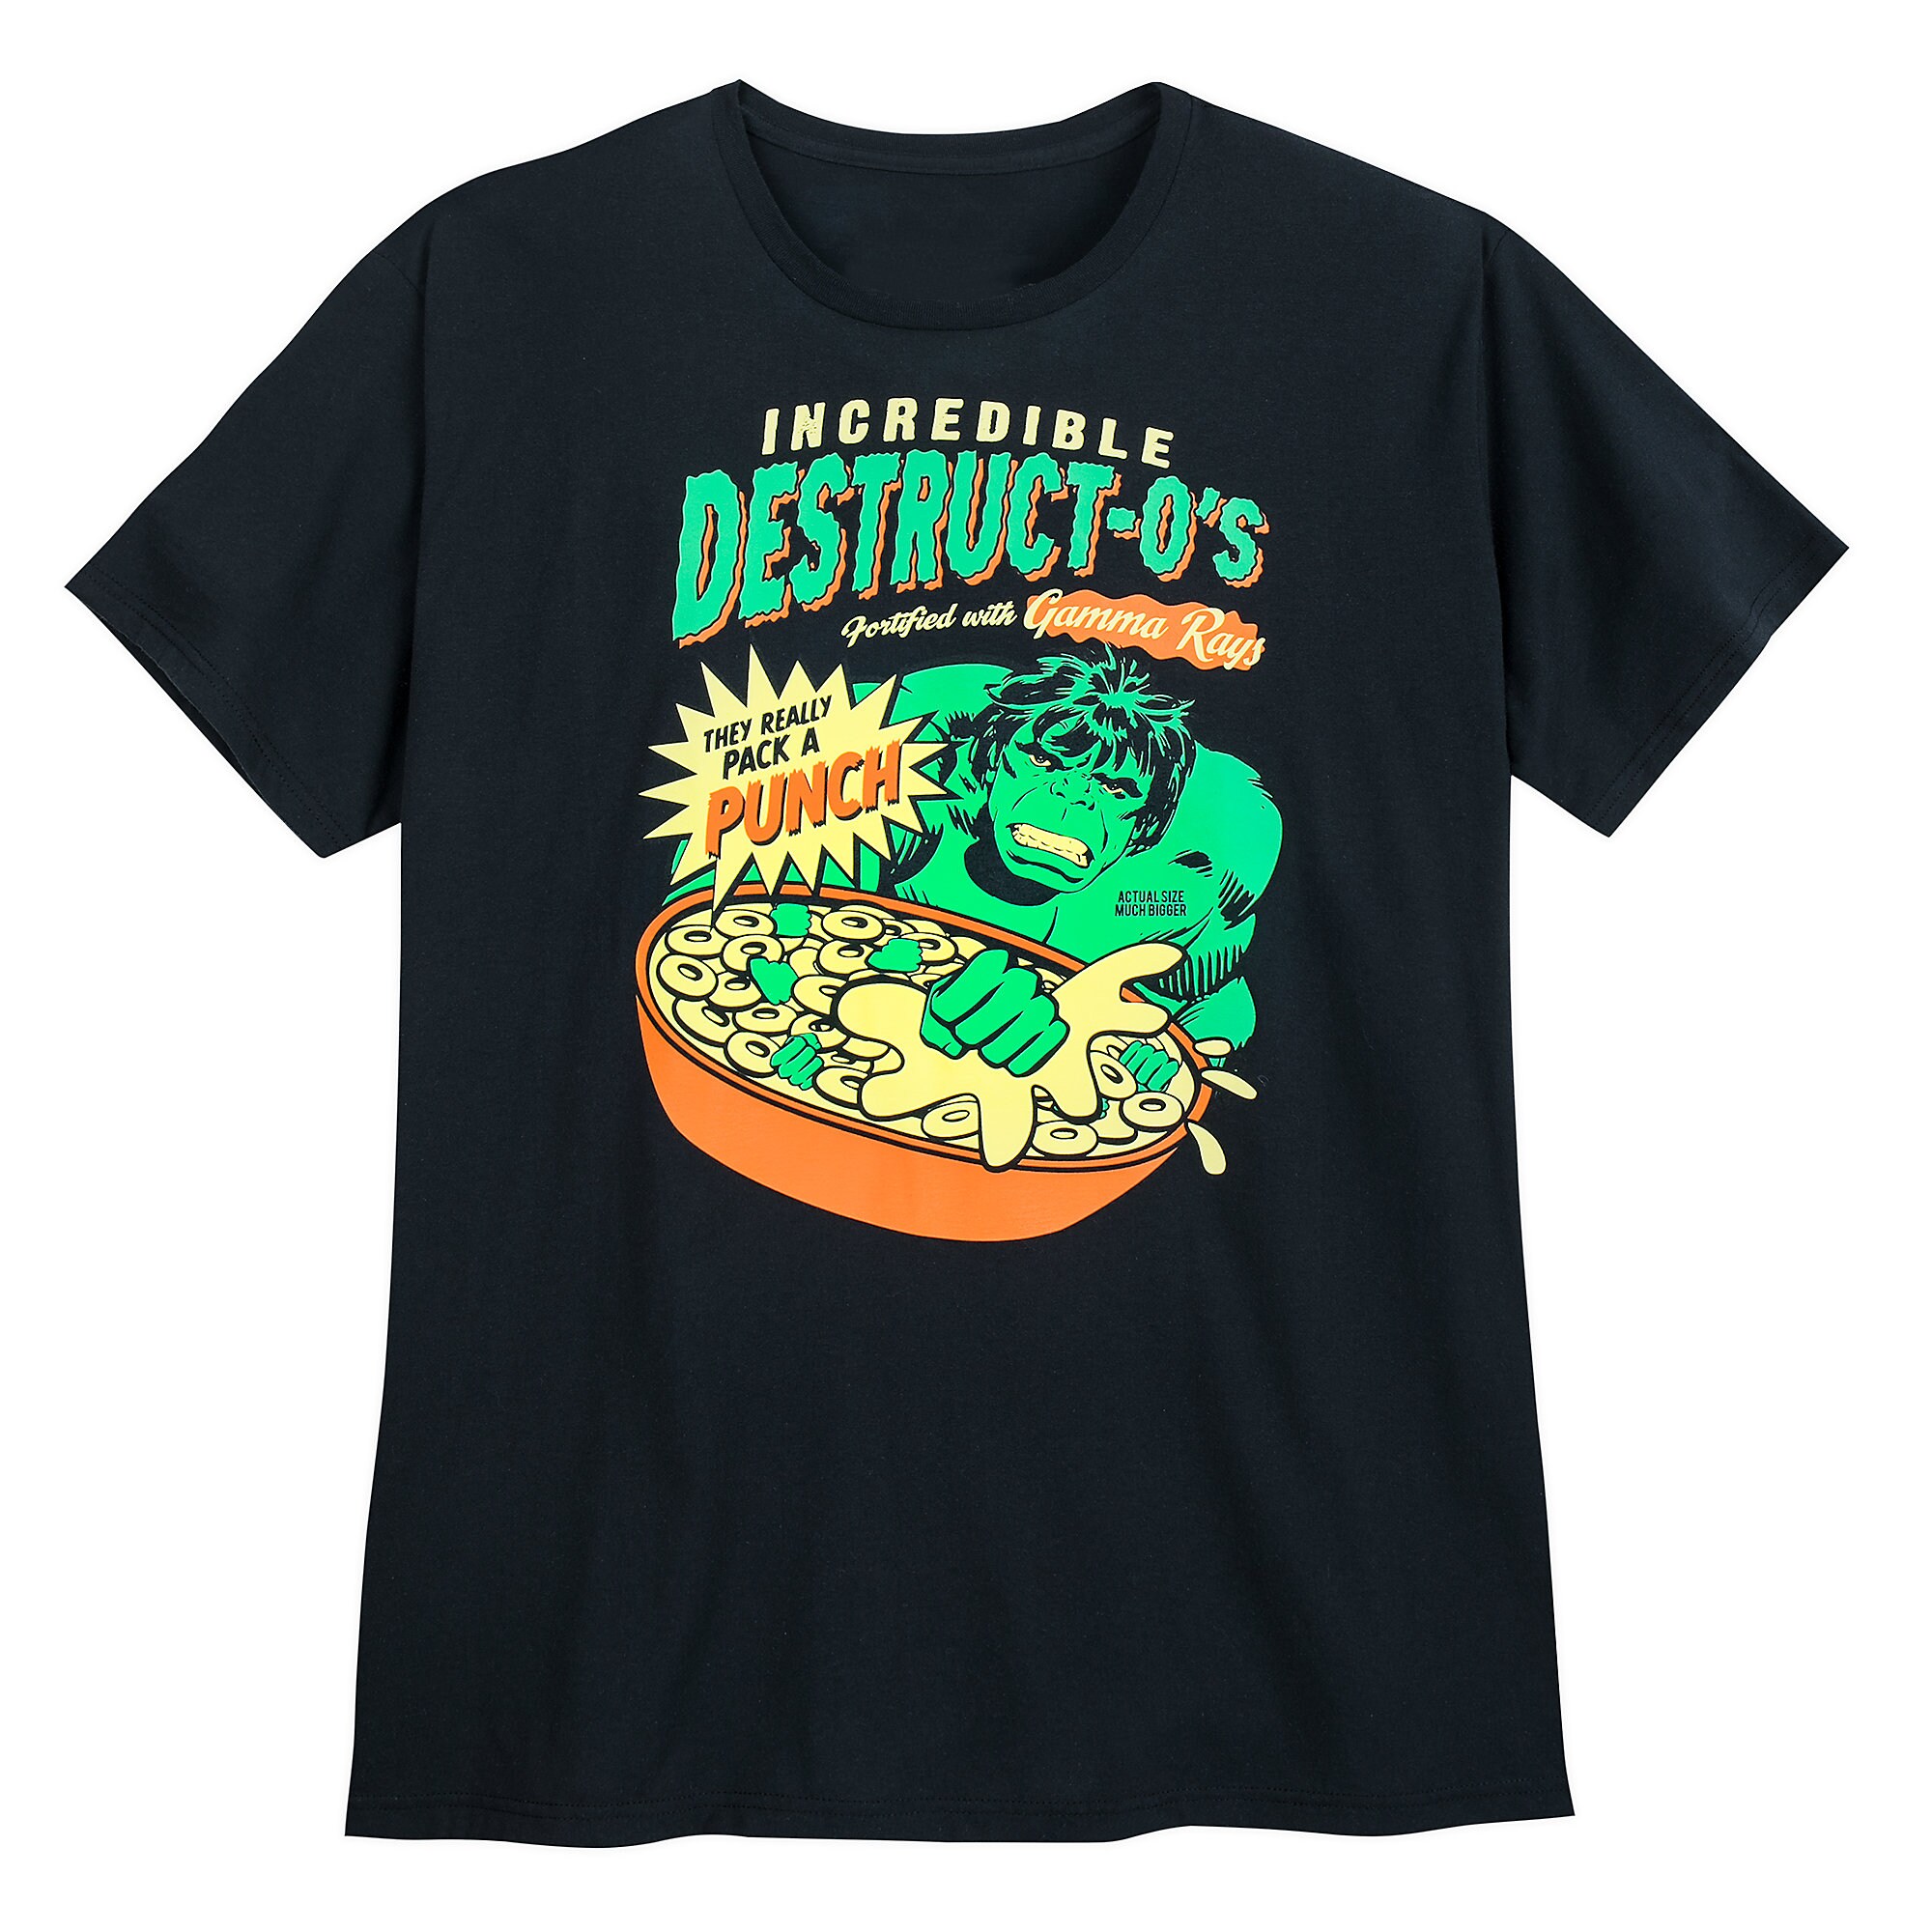 Hulk Cereal Ad T-Shirt for Men - Extended Size